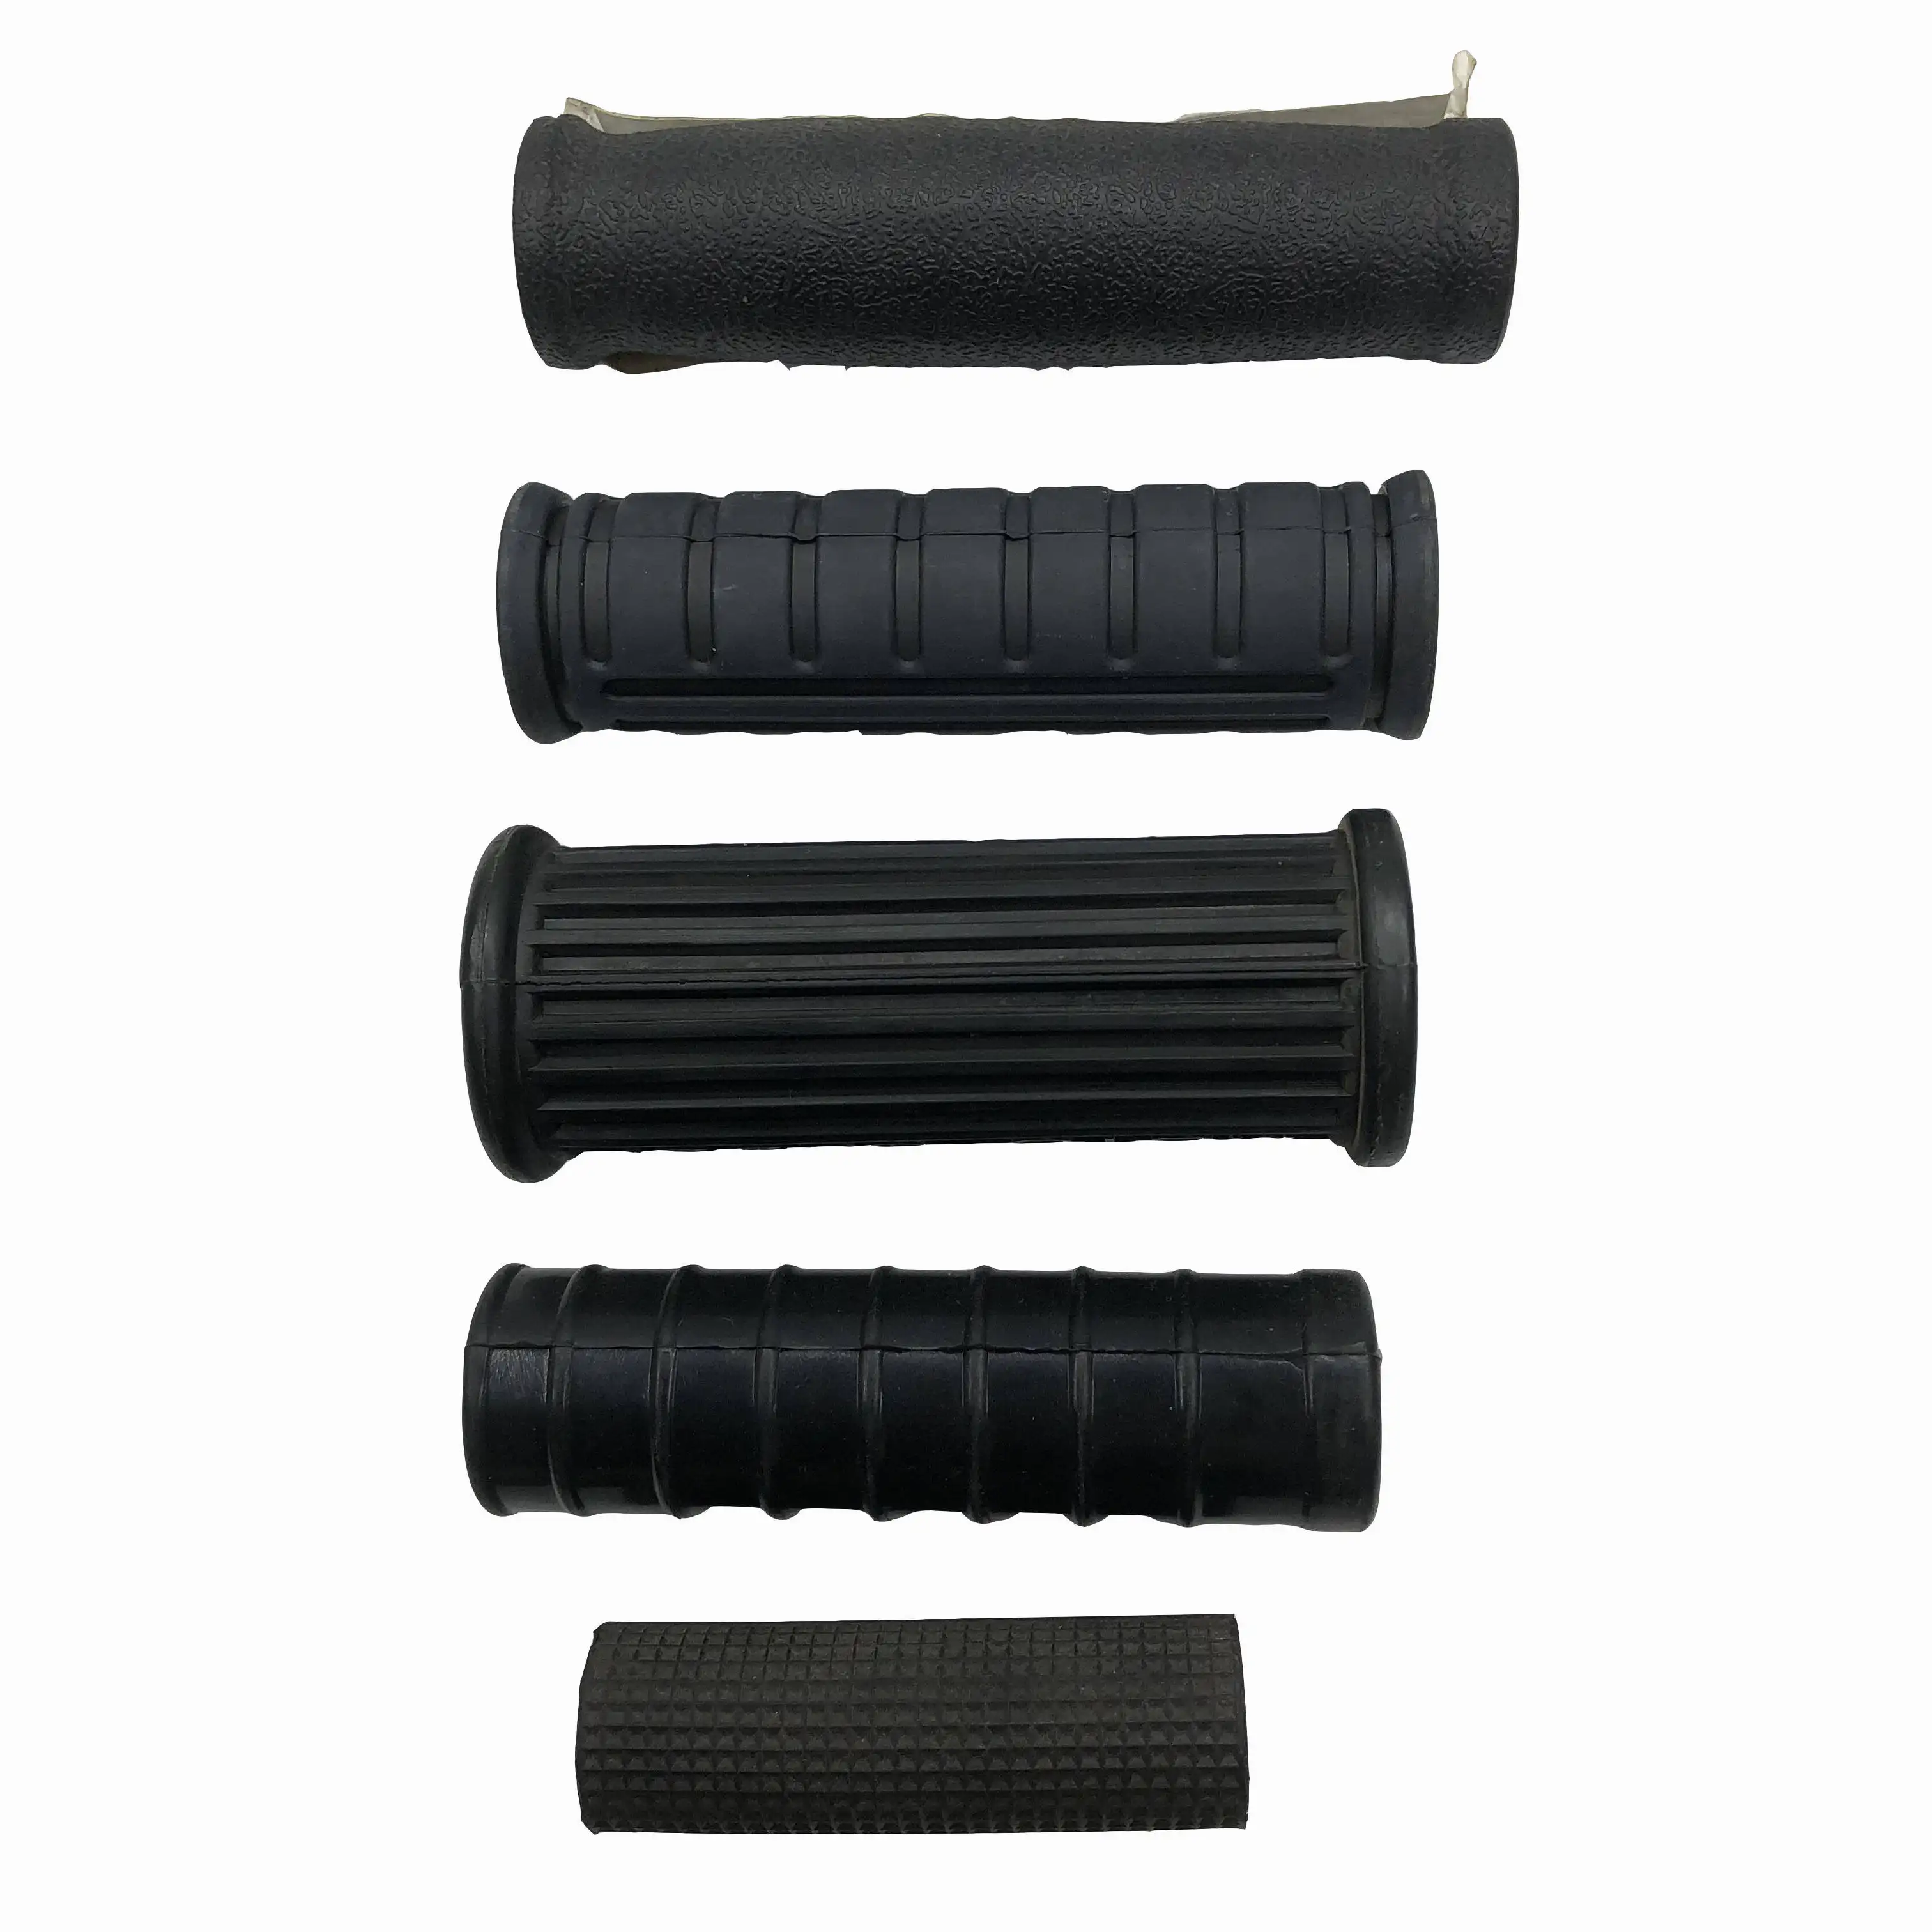 Custom-Made Rubber Handle Grip for Fitness Equipment and Bike/Bicycle Handle Premium Rubber Products